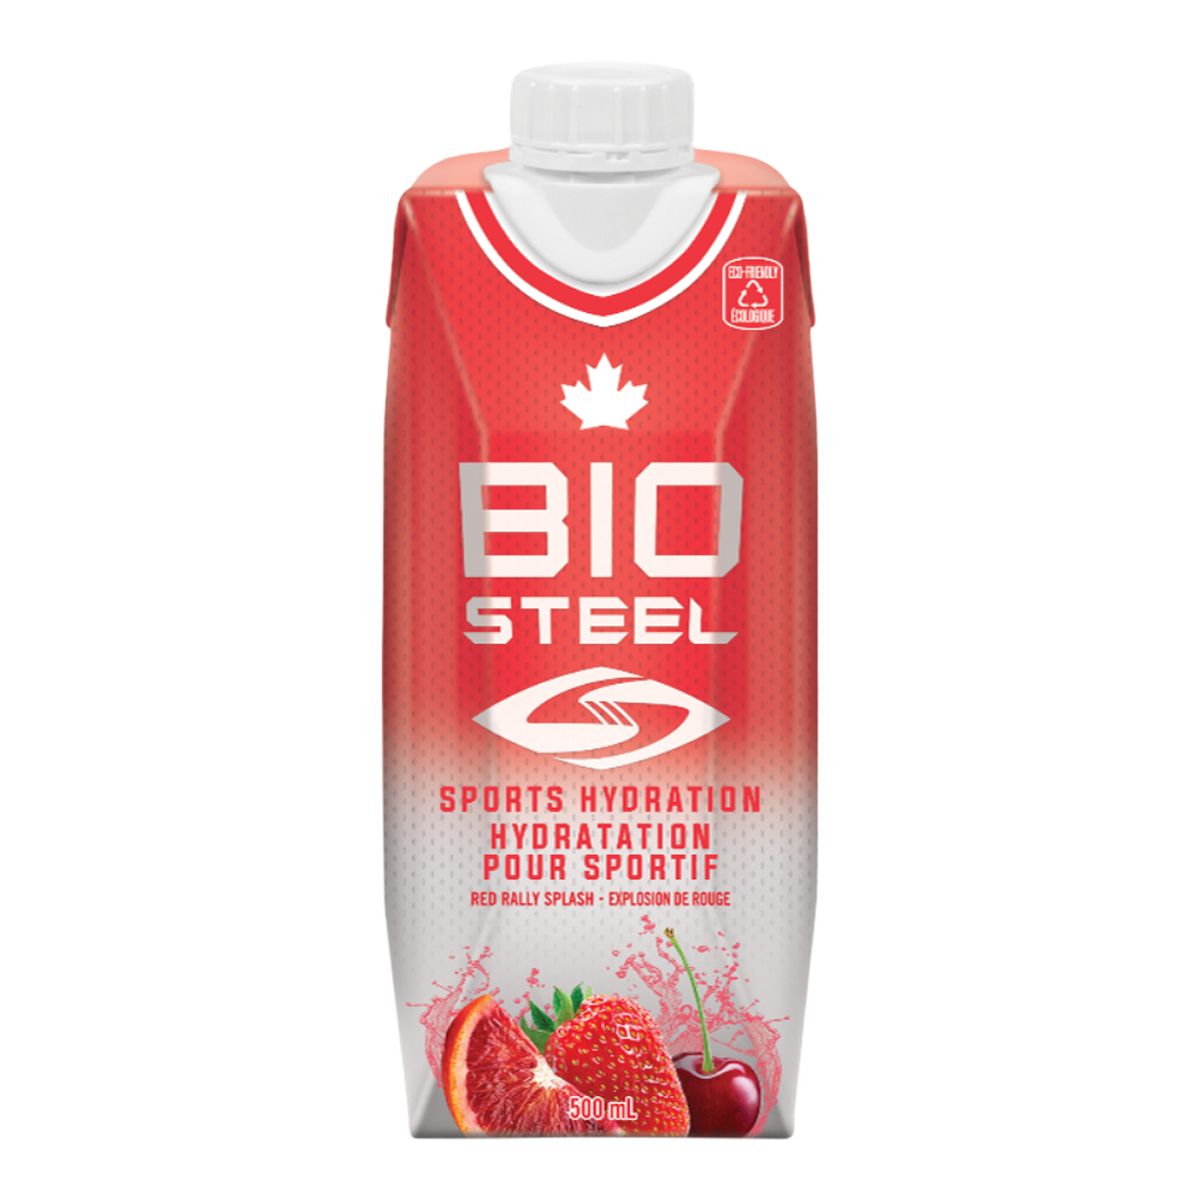 BioSteel 500ml Ready To Drink - Red Rally Splash - 12 Pack